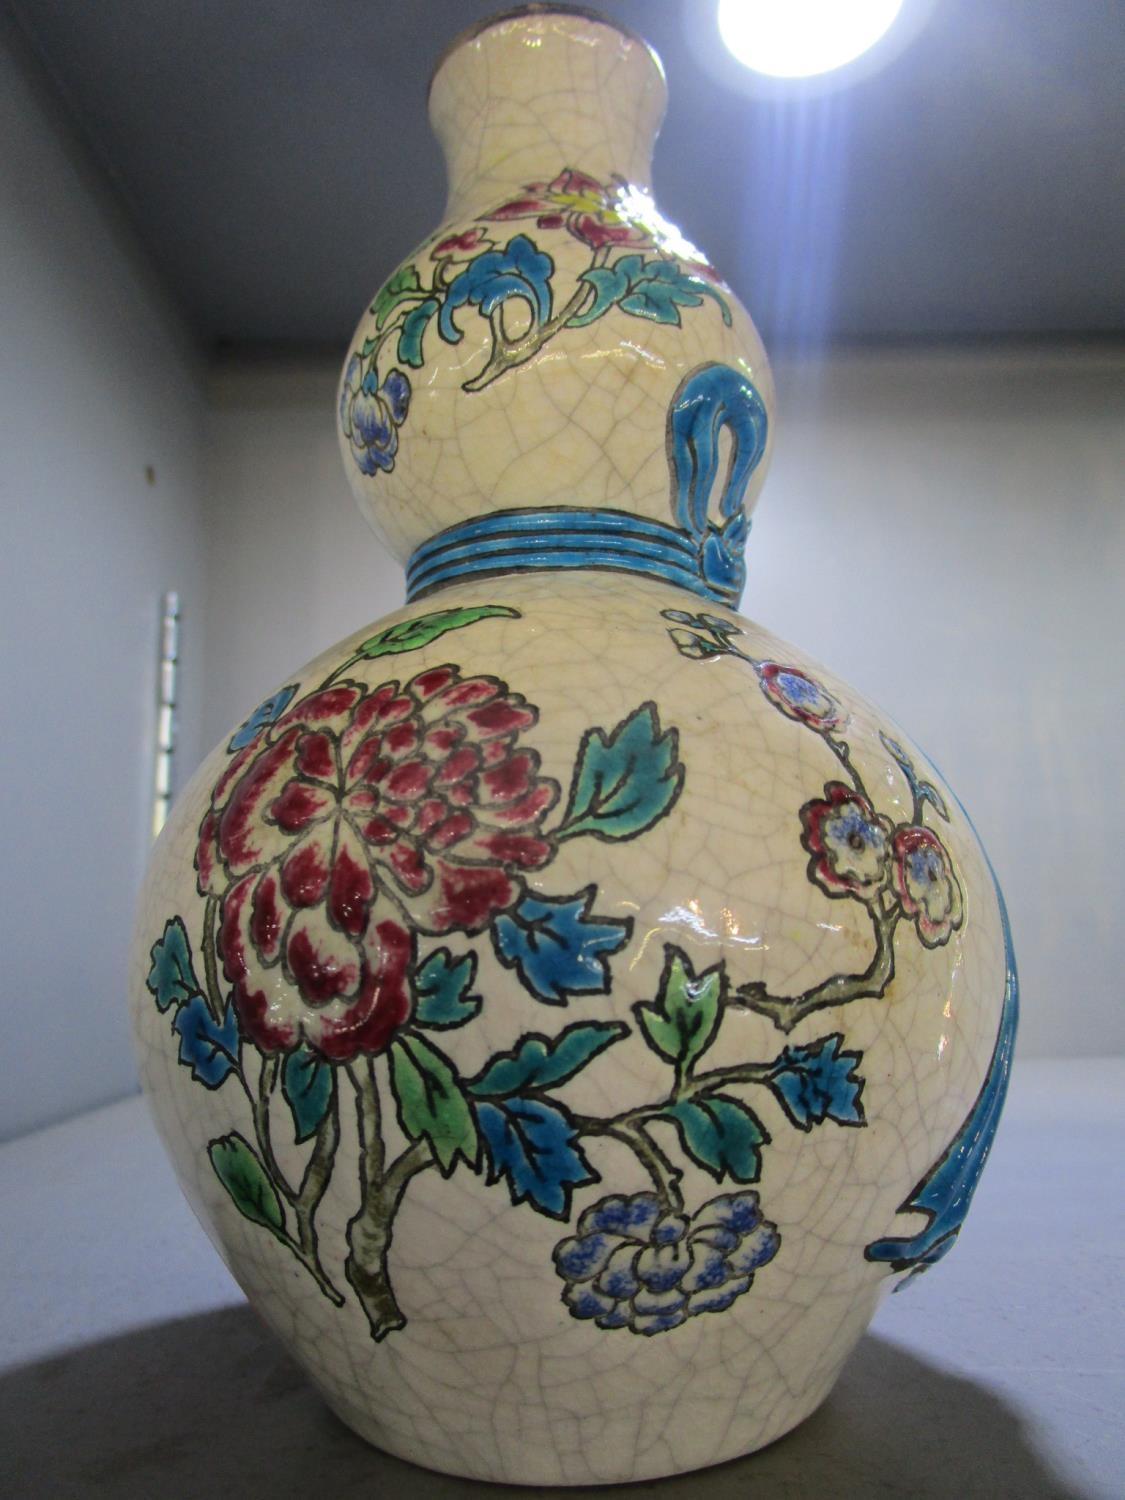 A Longwy double gourd pottery vase with resized floral enamelled decoration on a crackle glazed - Image 3 of 6